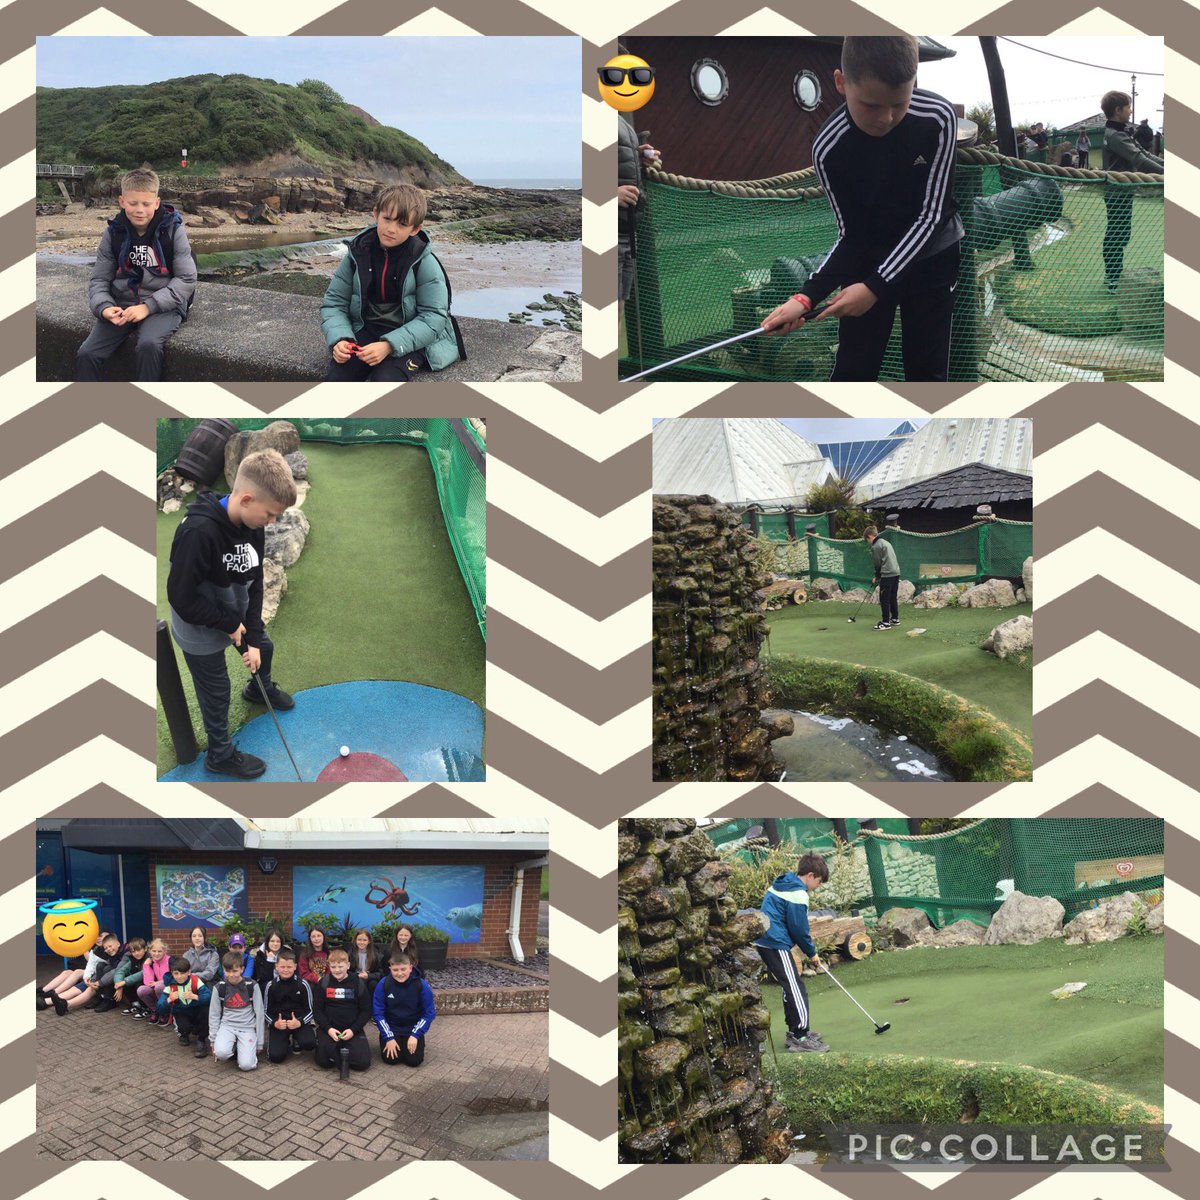 Team Humber have enjoyed their Pirate Mini Golf session and their visit to the Sealife centre this morning 🐠🐙🏌🏻‍♂️ …. Next stop is Fish & Chips on the beach 🍟